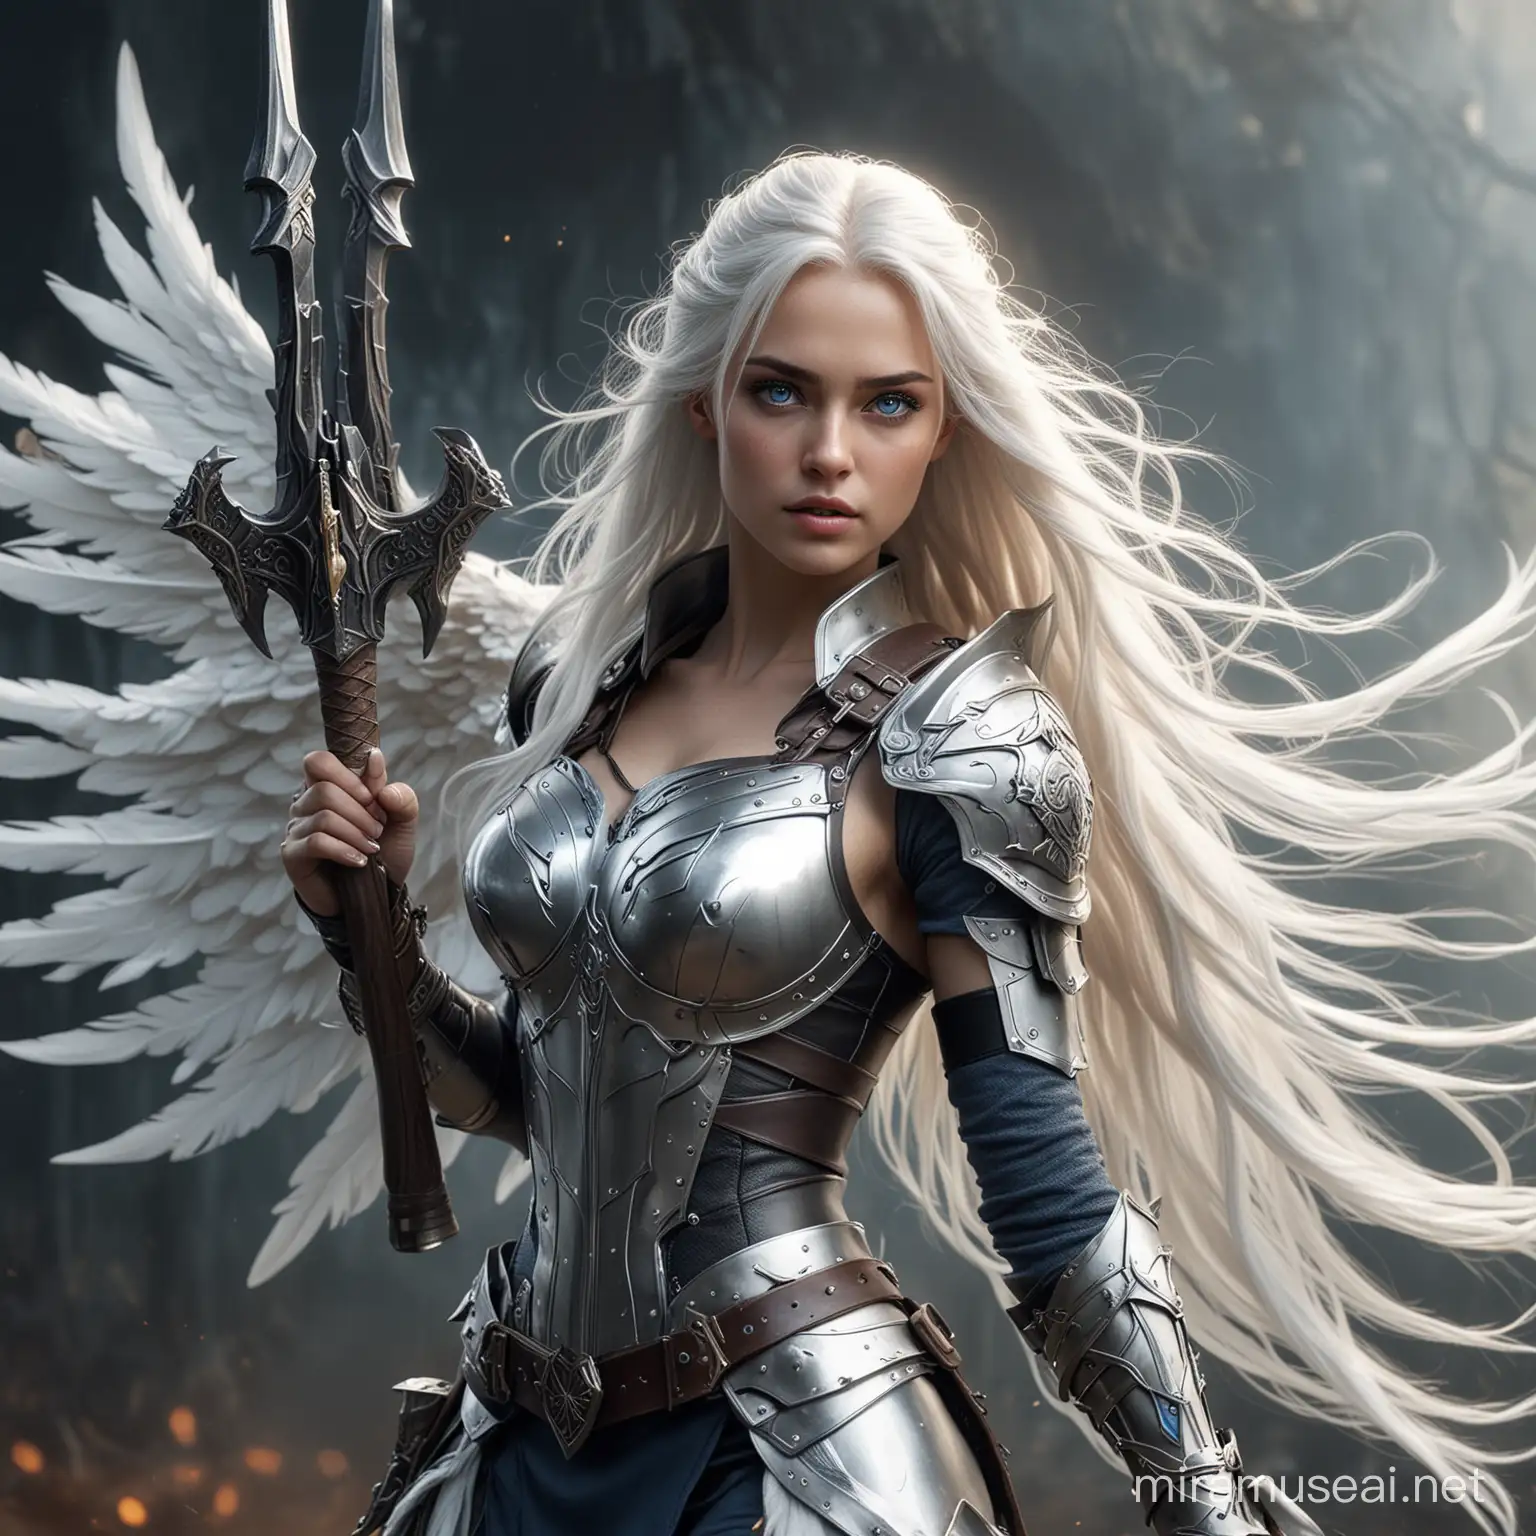 Realistic 4K Valkyrie Warrior with Fairy Wings and Weapon